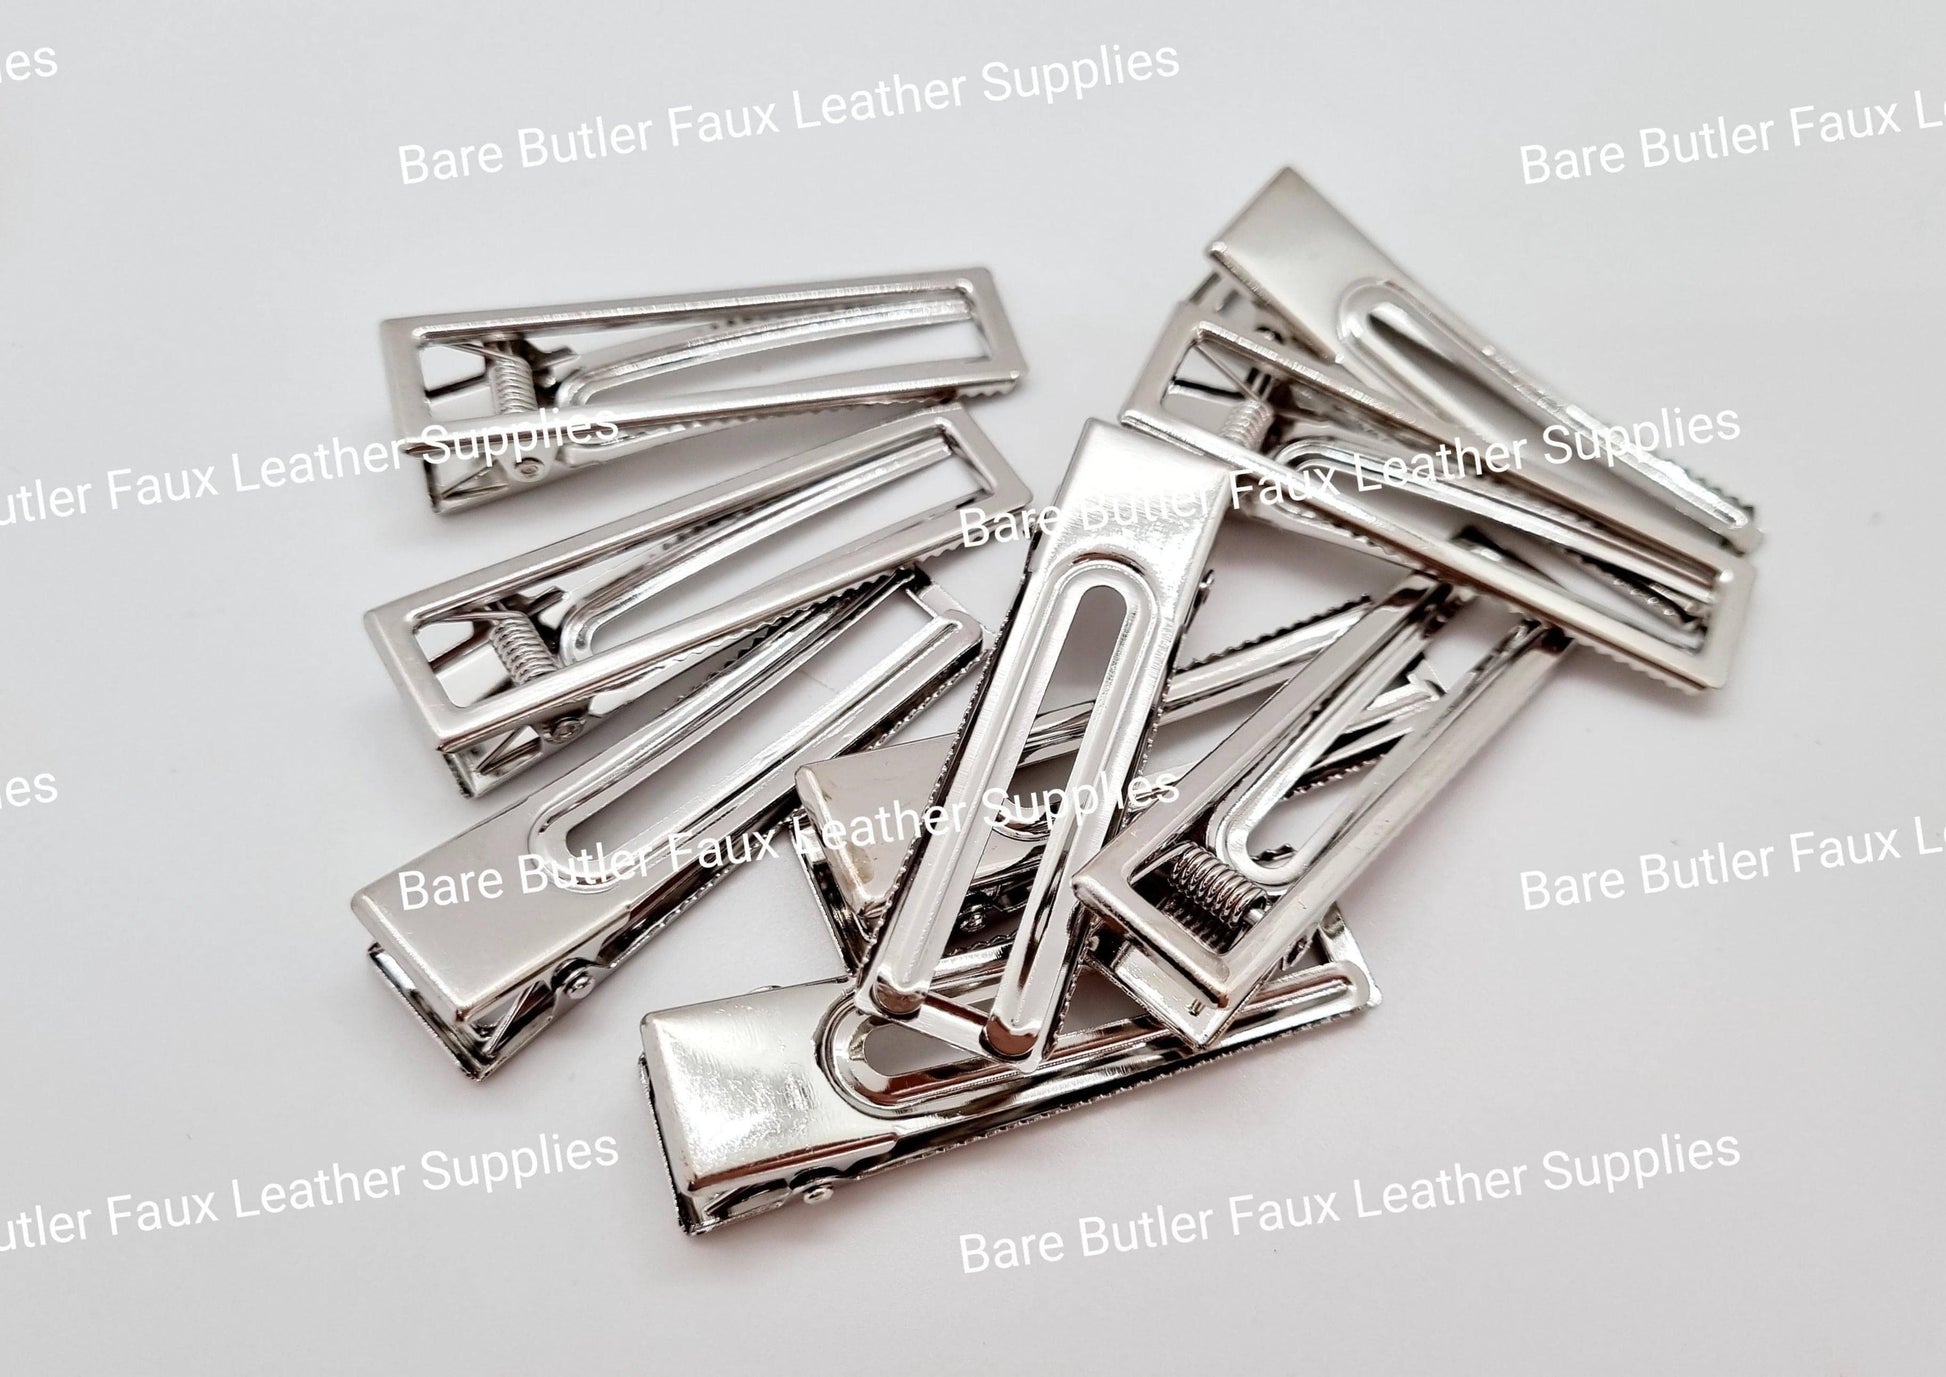 Barrette Clips Rectangular 10 Pack - Accessories, barrette, Clip, Hair, Hair clips - Bare Butler Faux Leather Supplies 